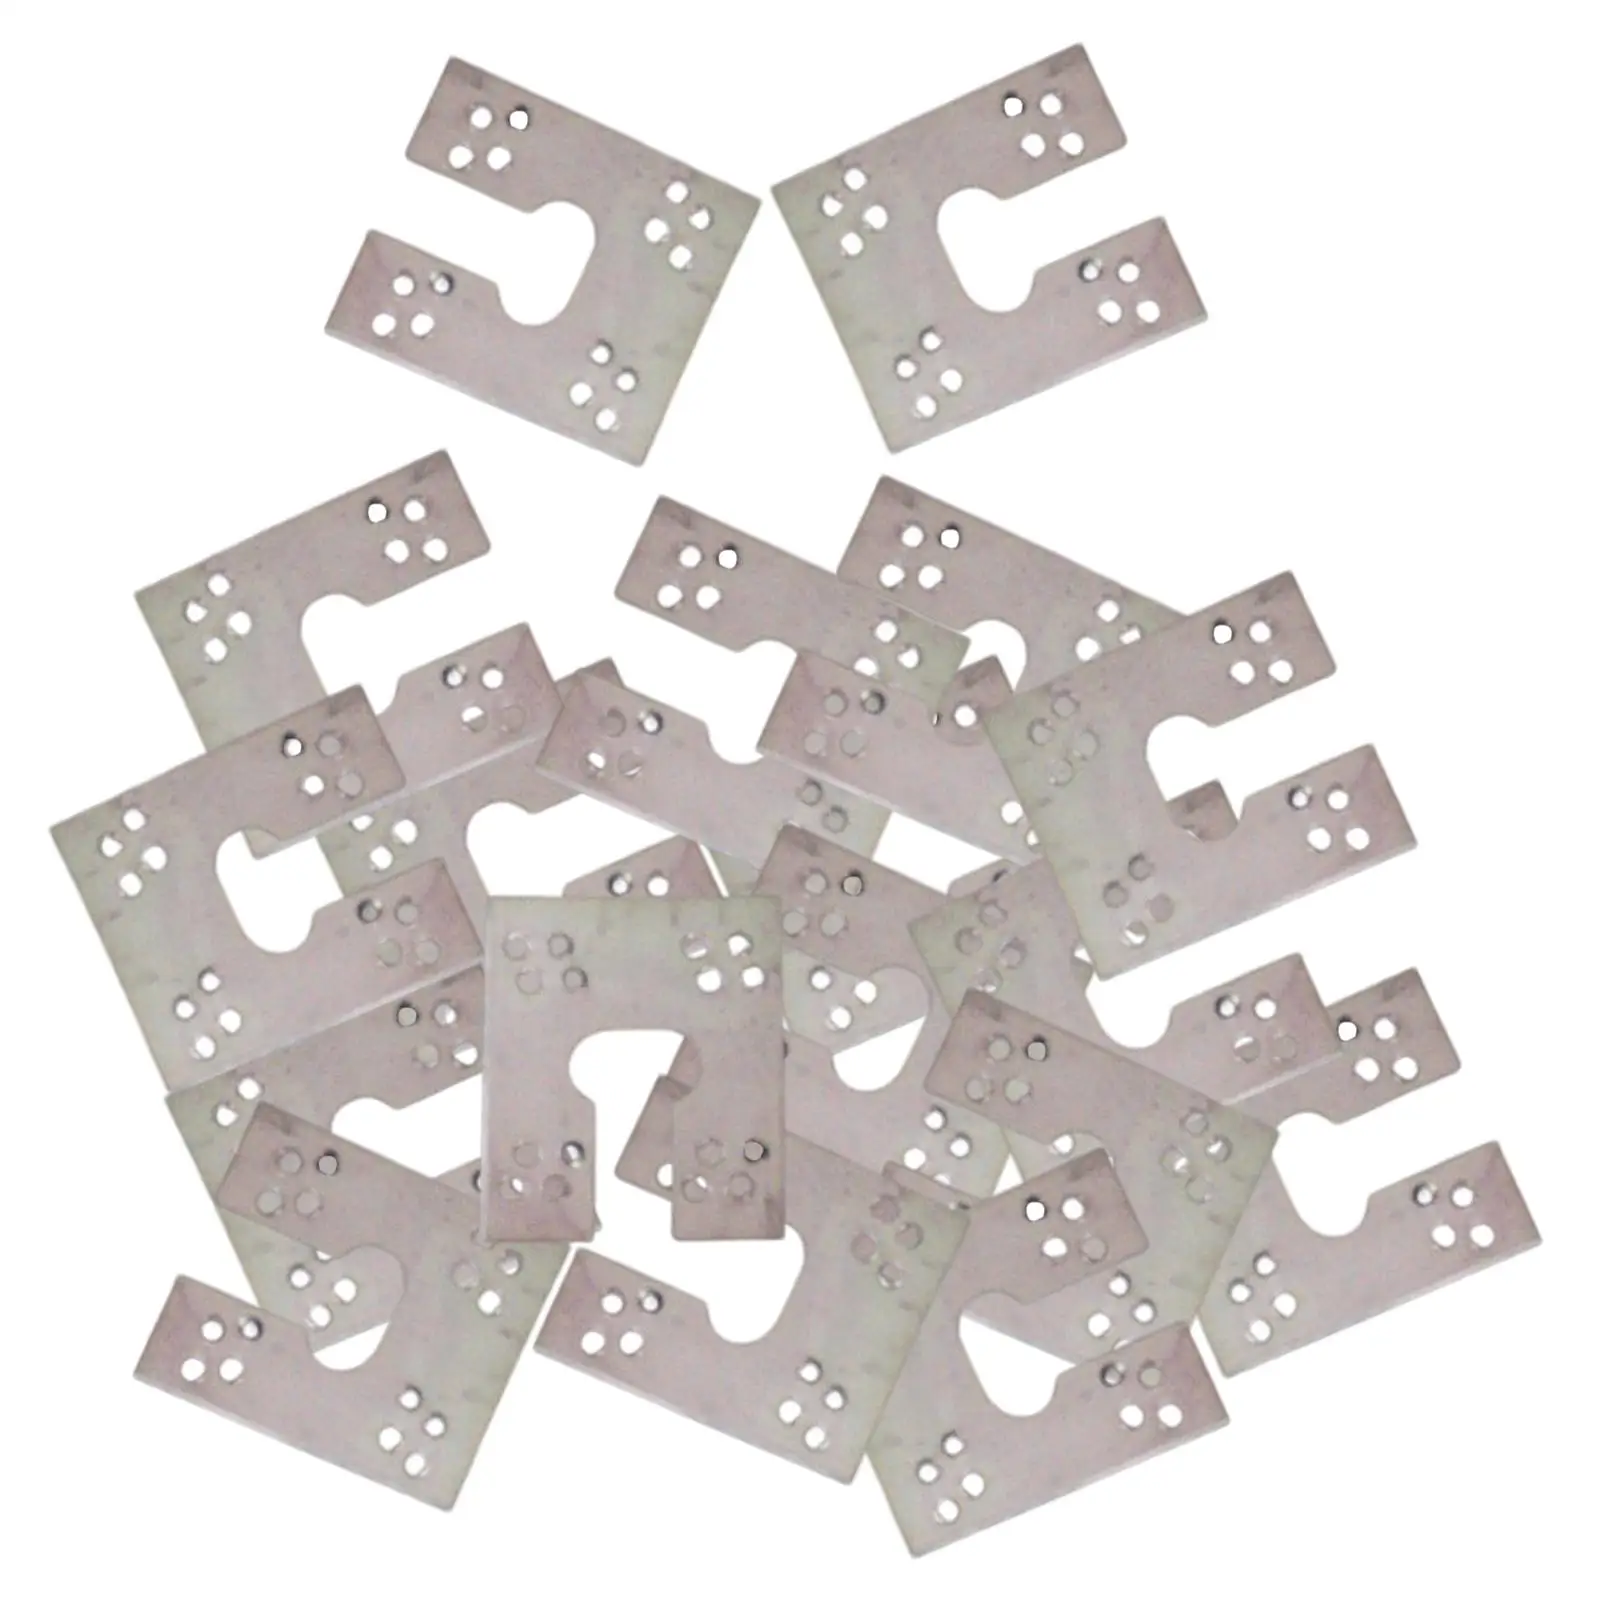 41mm Purlin C Type Grounding Gasket 50pcs Fits Photovoltaic Systems